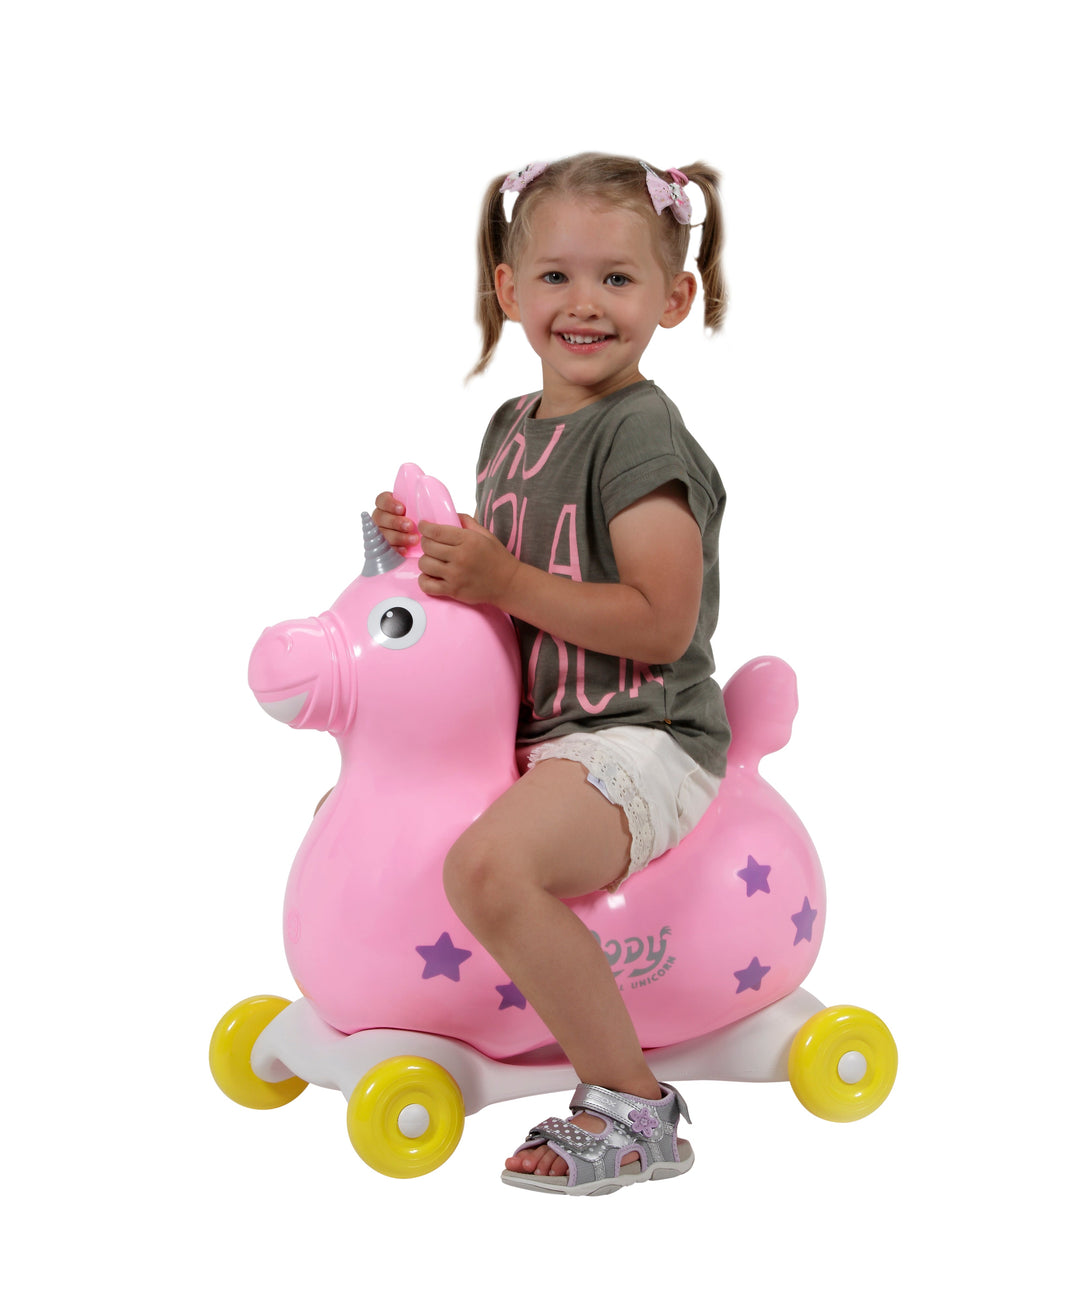 Our celebrated Rody now in the exclusive unicorn version. The magical horn and the sparkling stars stimulate children’s imagination. Having the same features as Rody horse, also Rody Magical Unicorn helps your child develop balance, movement skills and coordination.